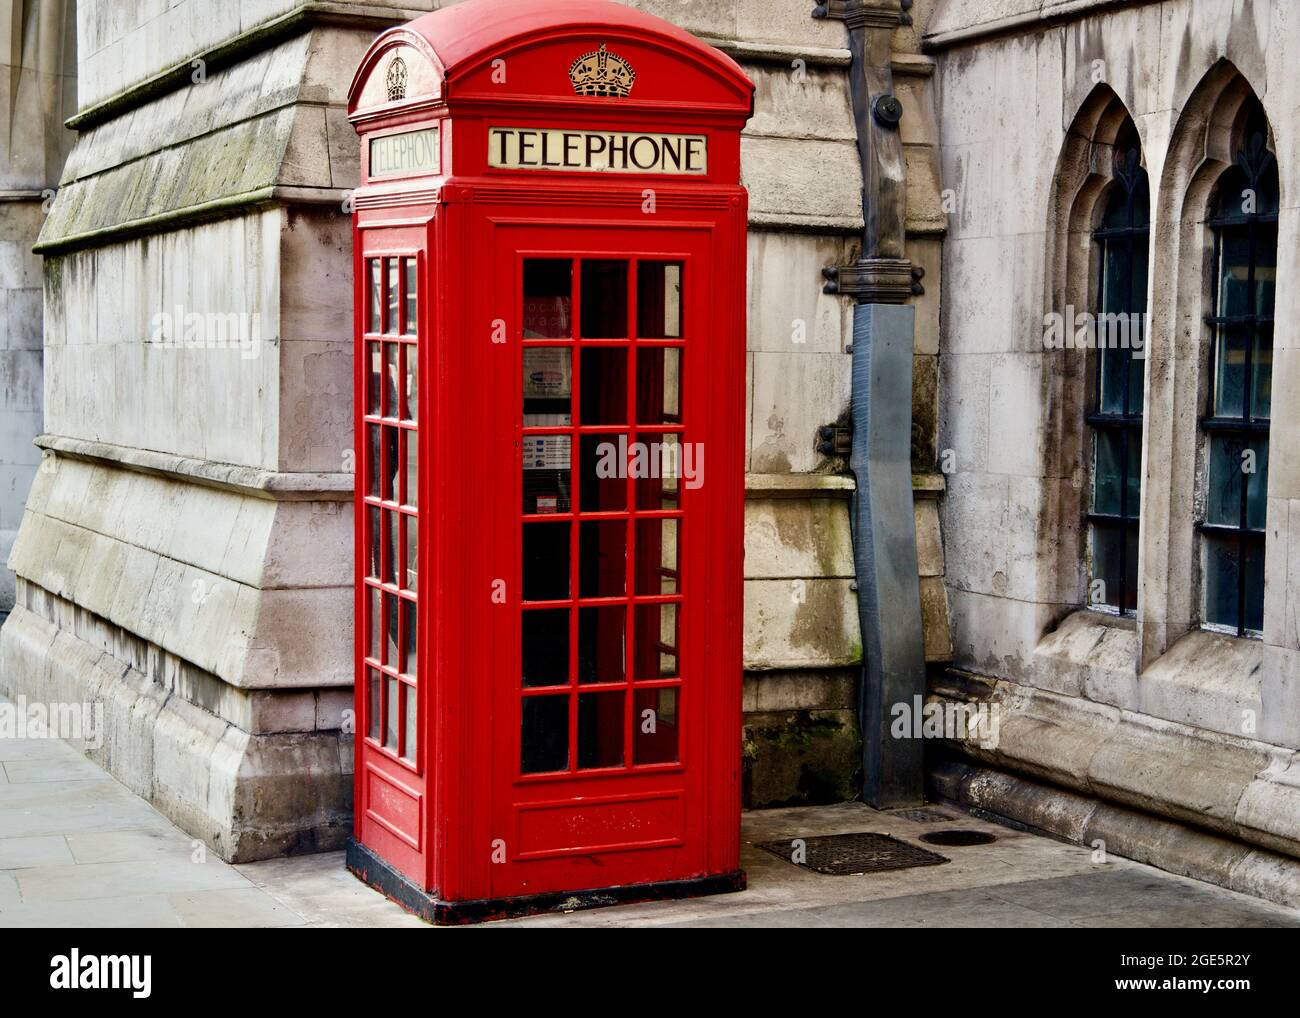 Phone Box - London Iconic phone box in bright red standing against a classical style building with arched windows and traditional stonework. Stock Photo